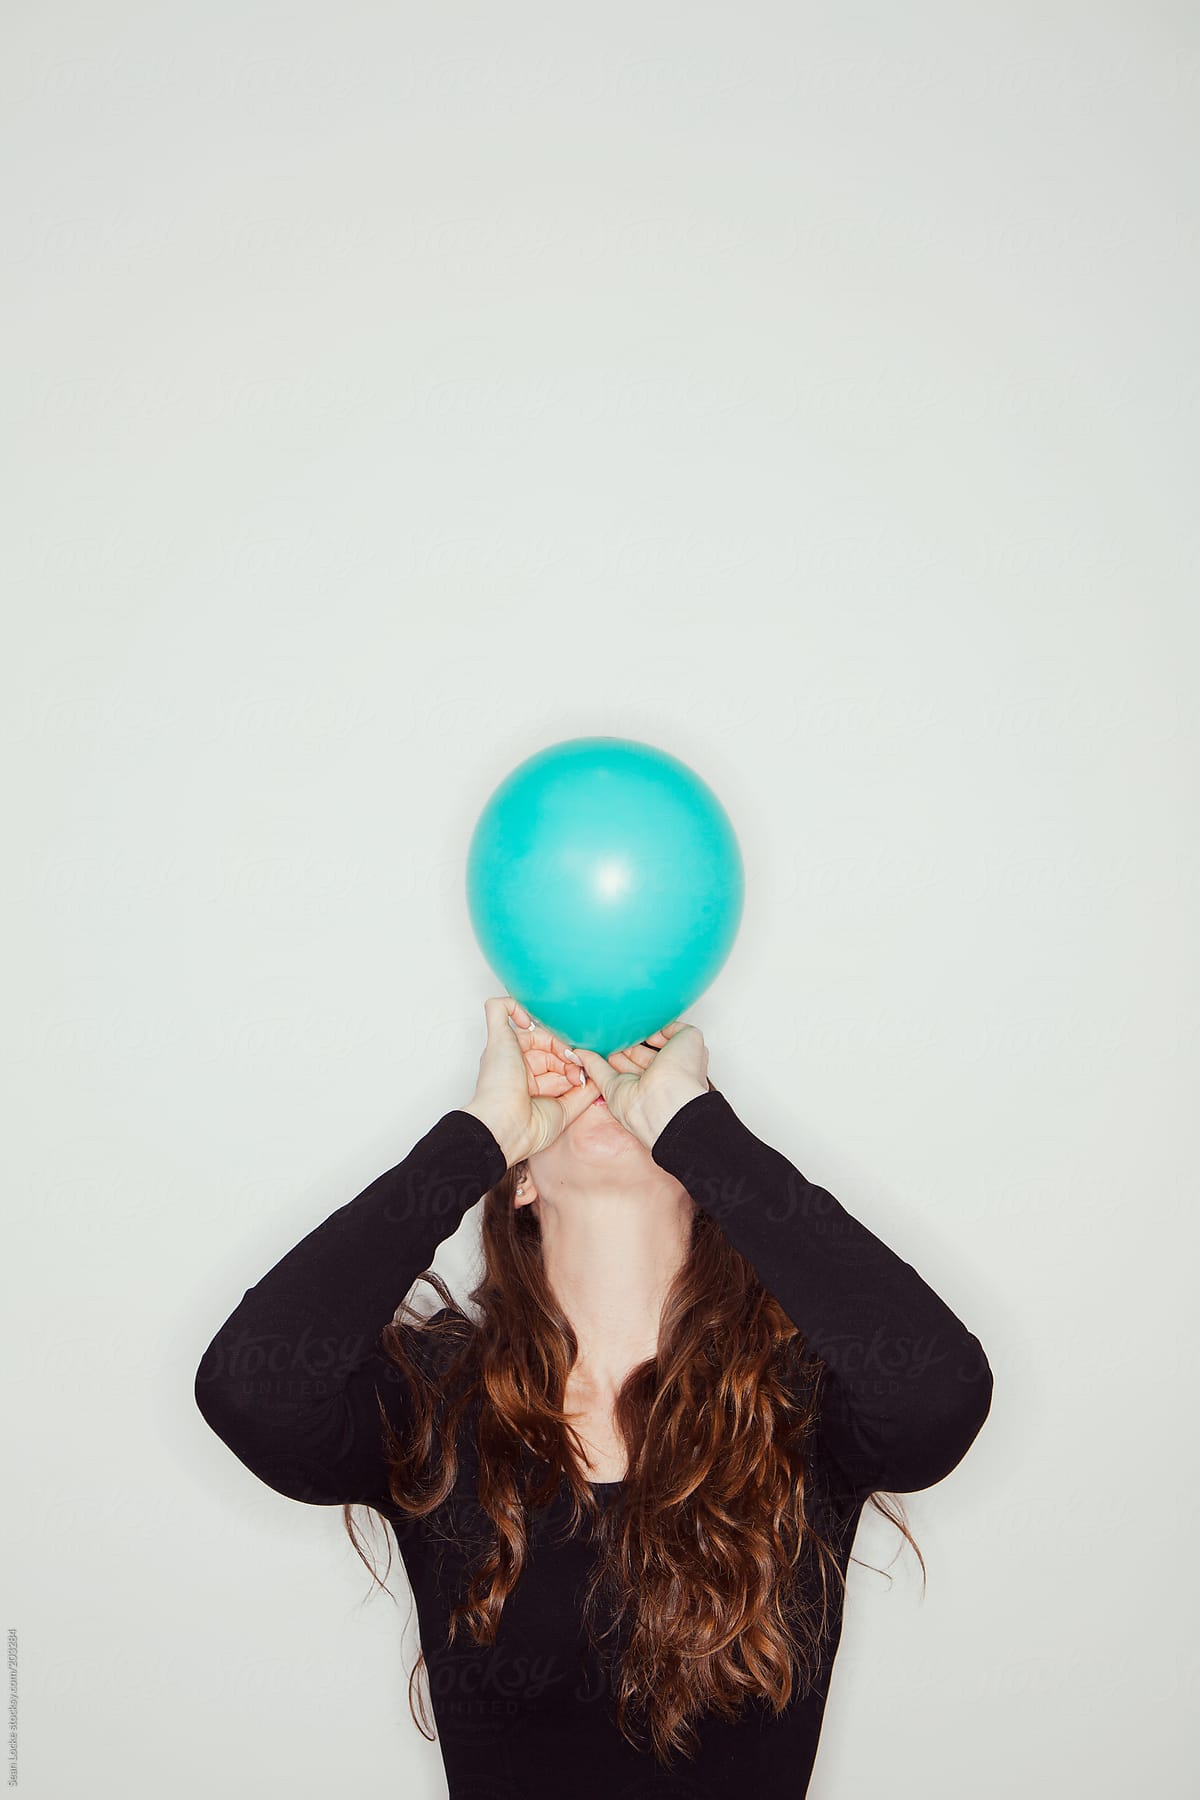 Portraits: Blowing Up A Balloon